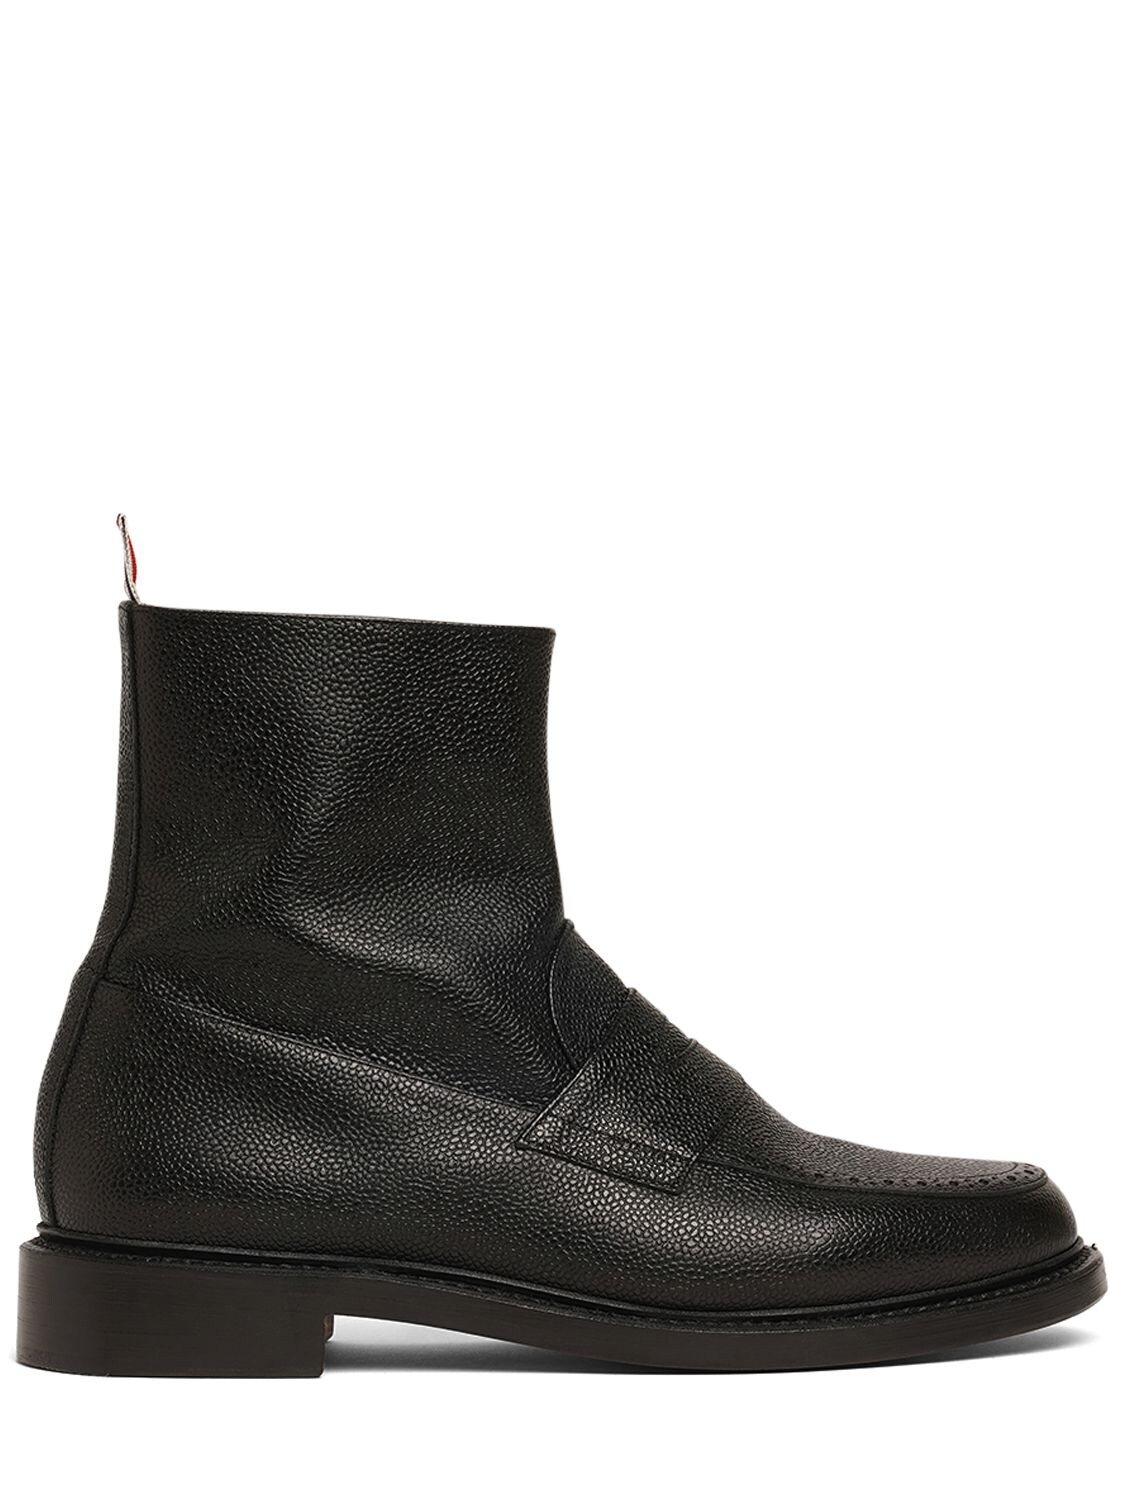 THOM BROWNE Penny Loafer Leather Ankle Boots